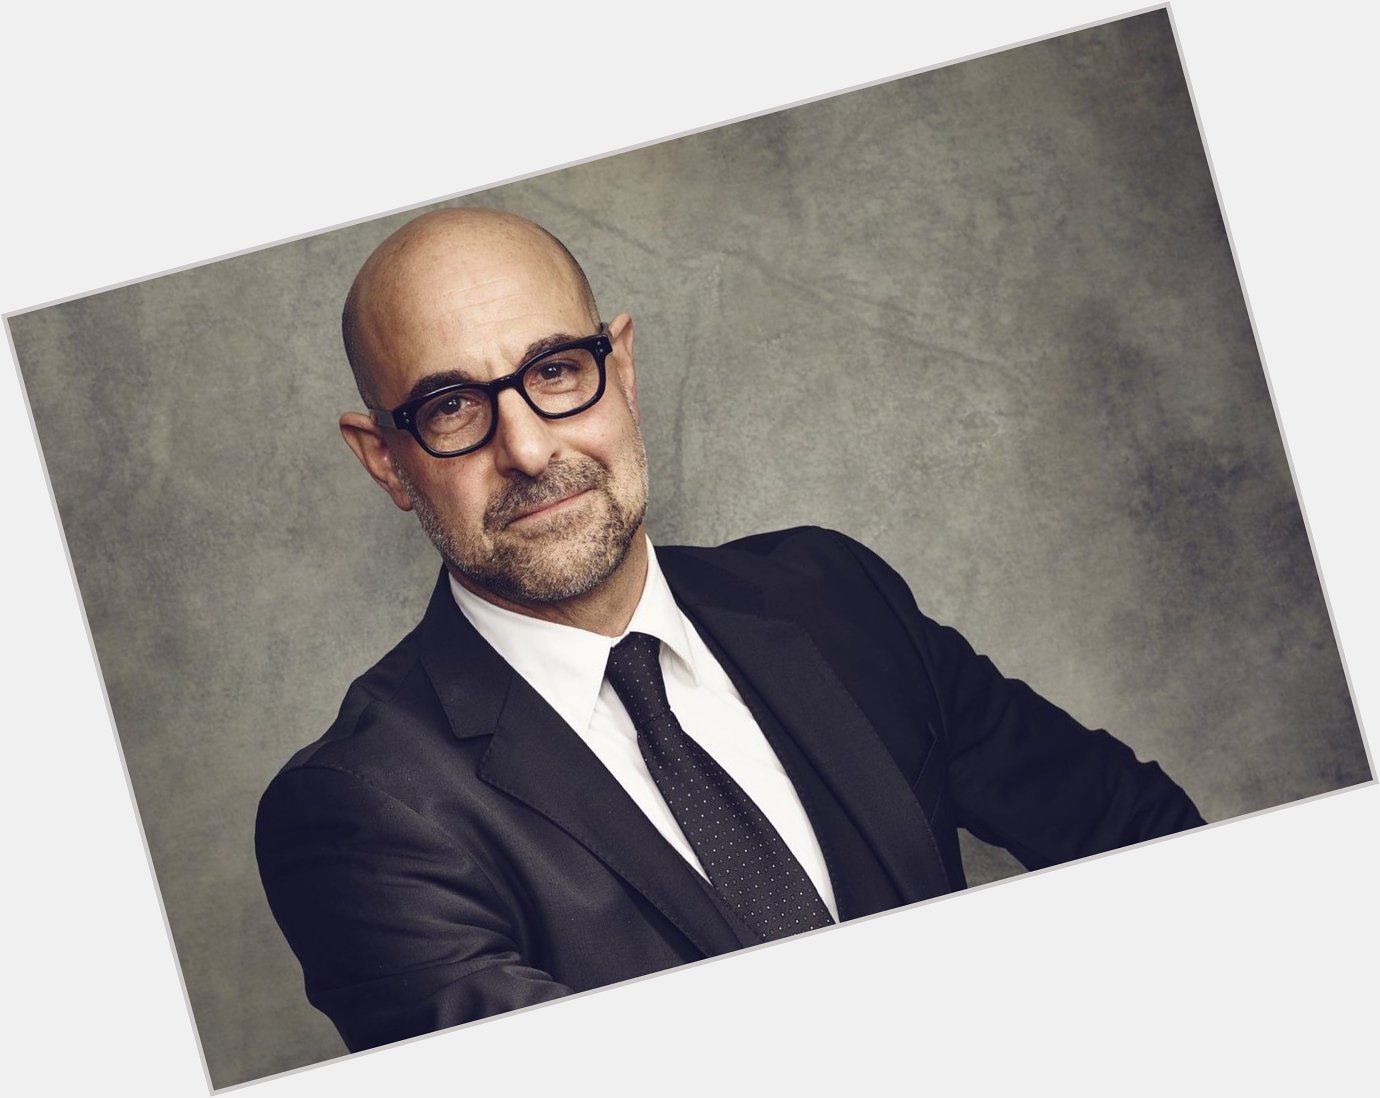 Another happy birthday to Stanley Tucci! 